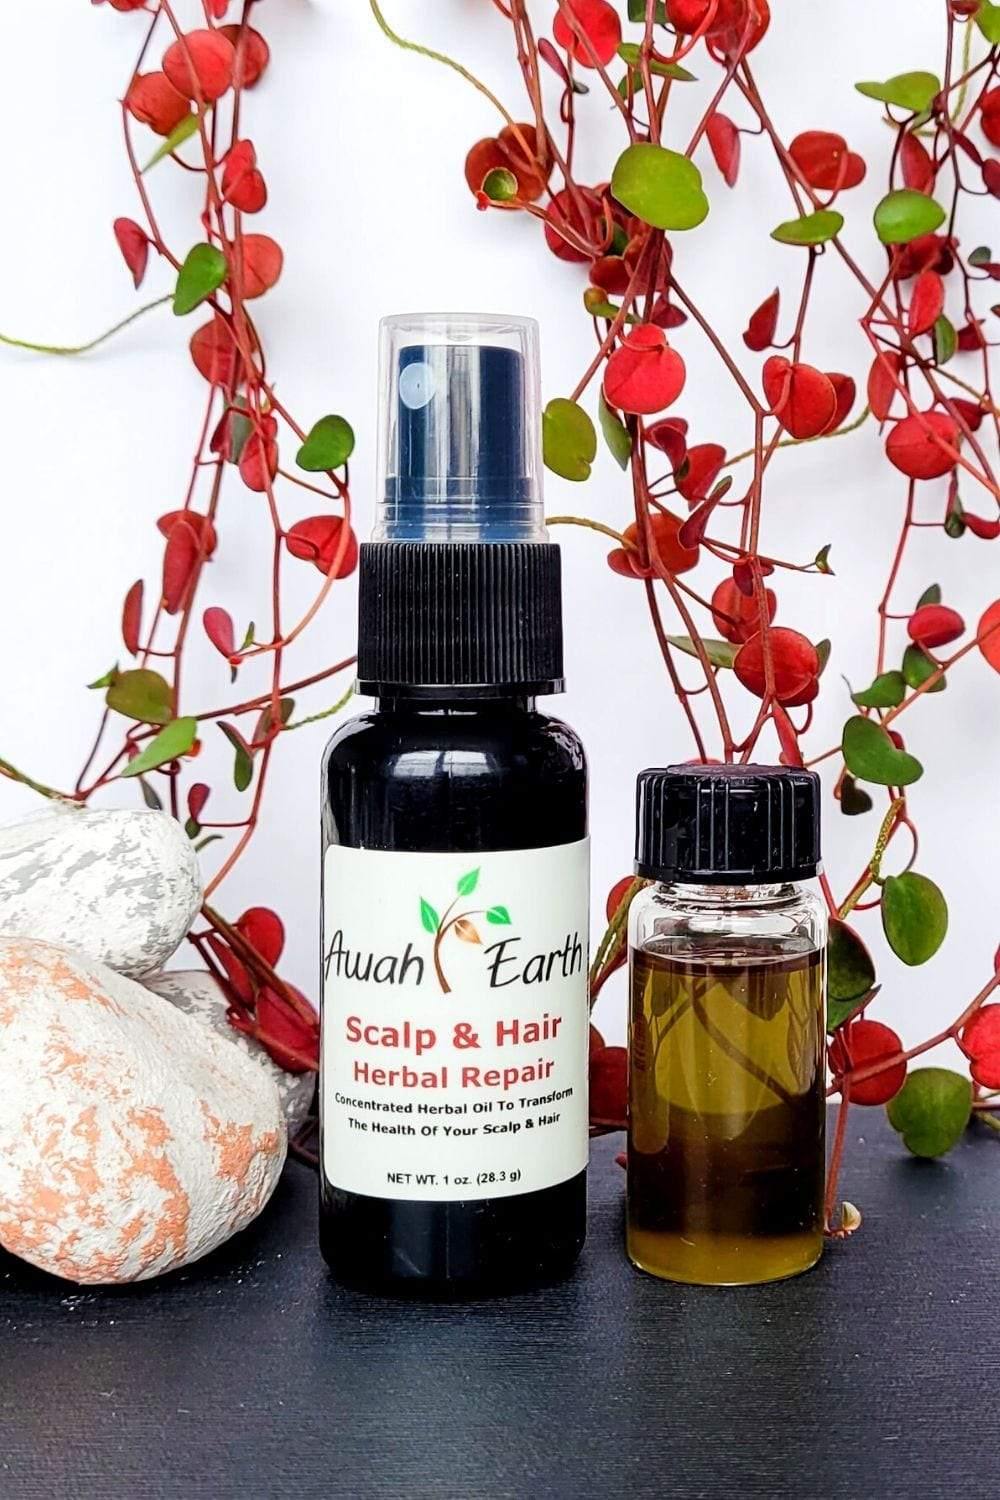 Scalp and Hair Herbal Repair (Natural Hair Oil). Helps people that are suffering from hair and scalp problems. Use it at night and let it do its work on your damaged hair and scalp.